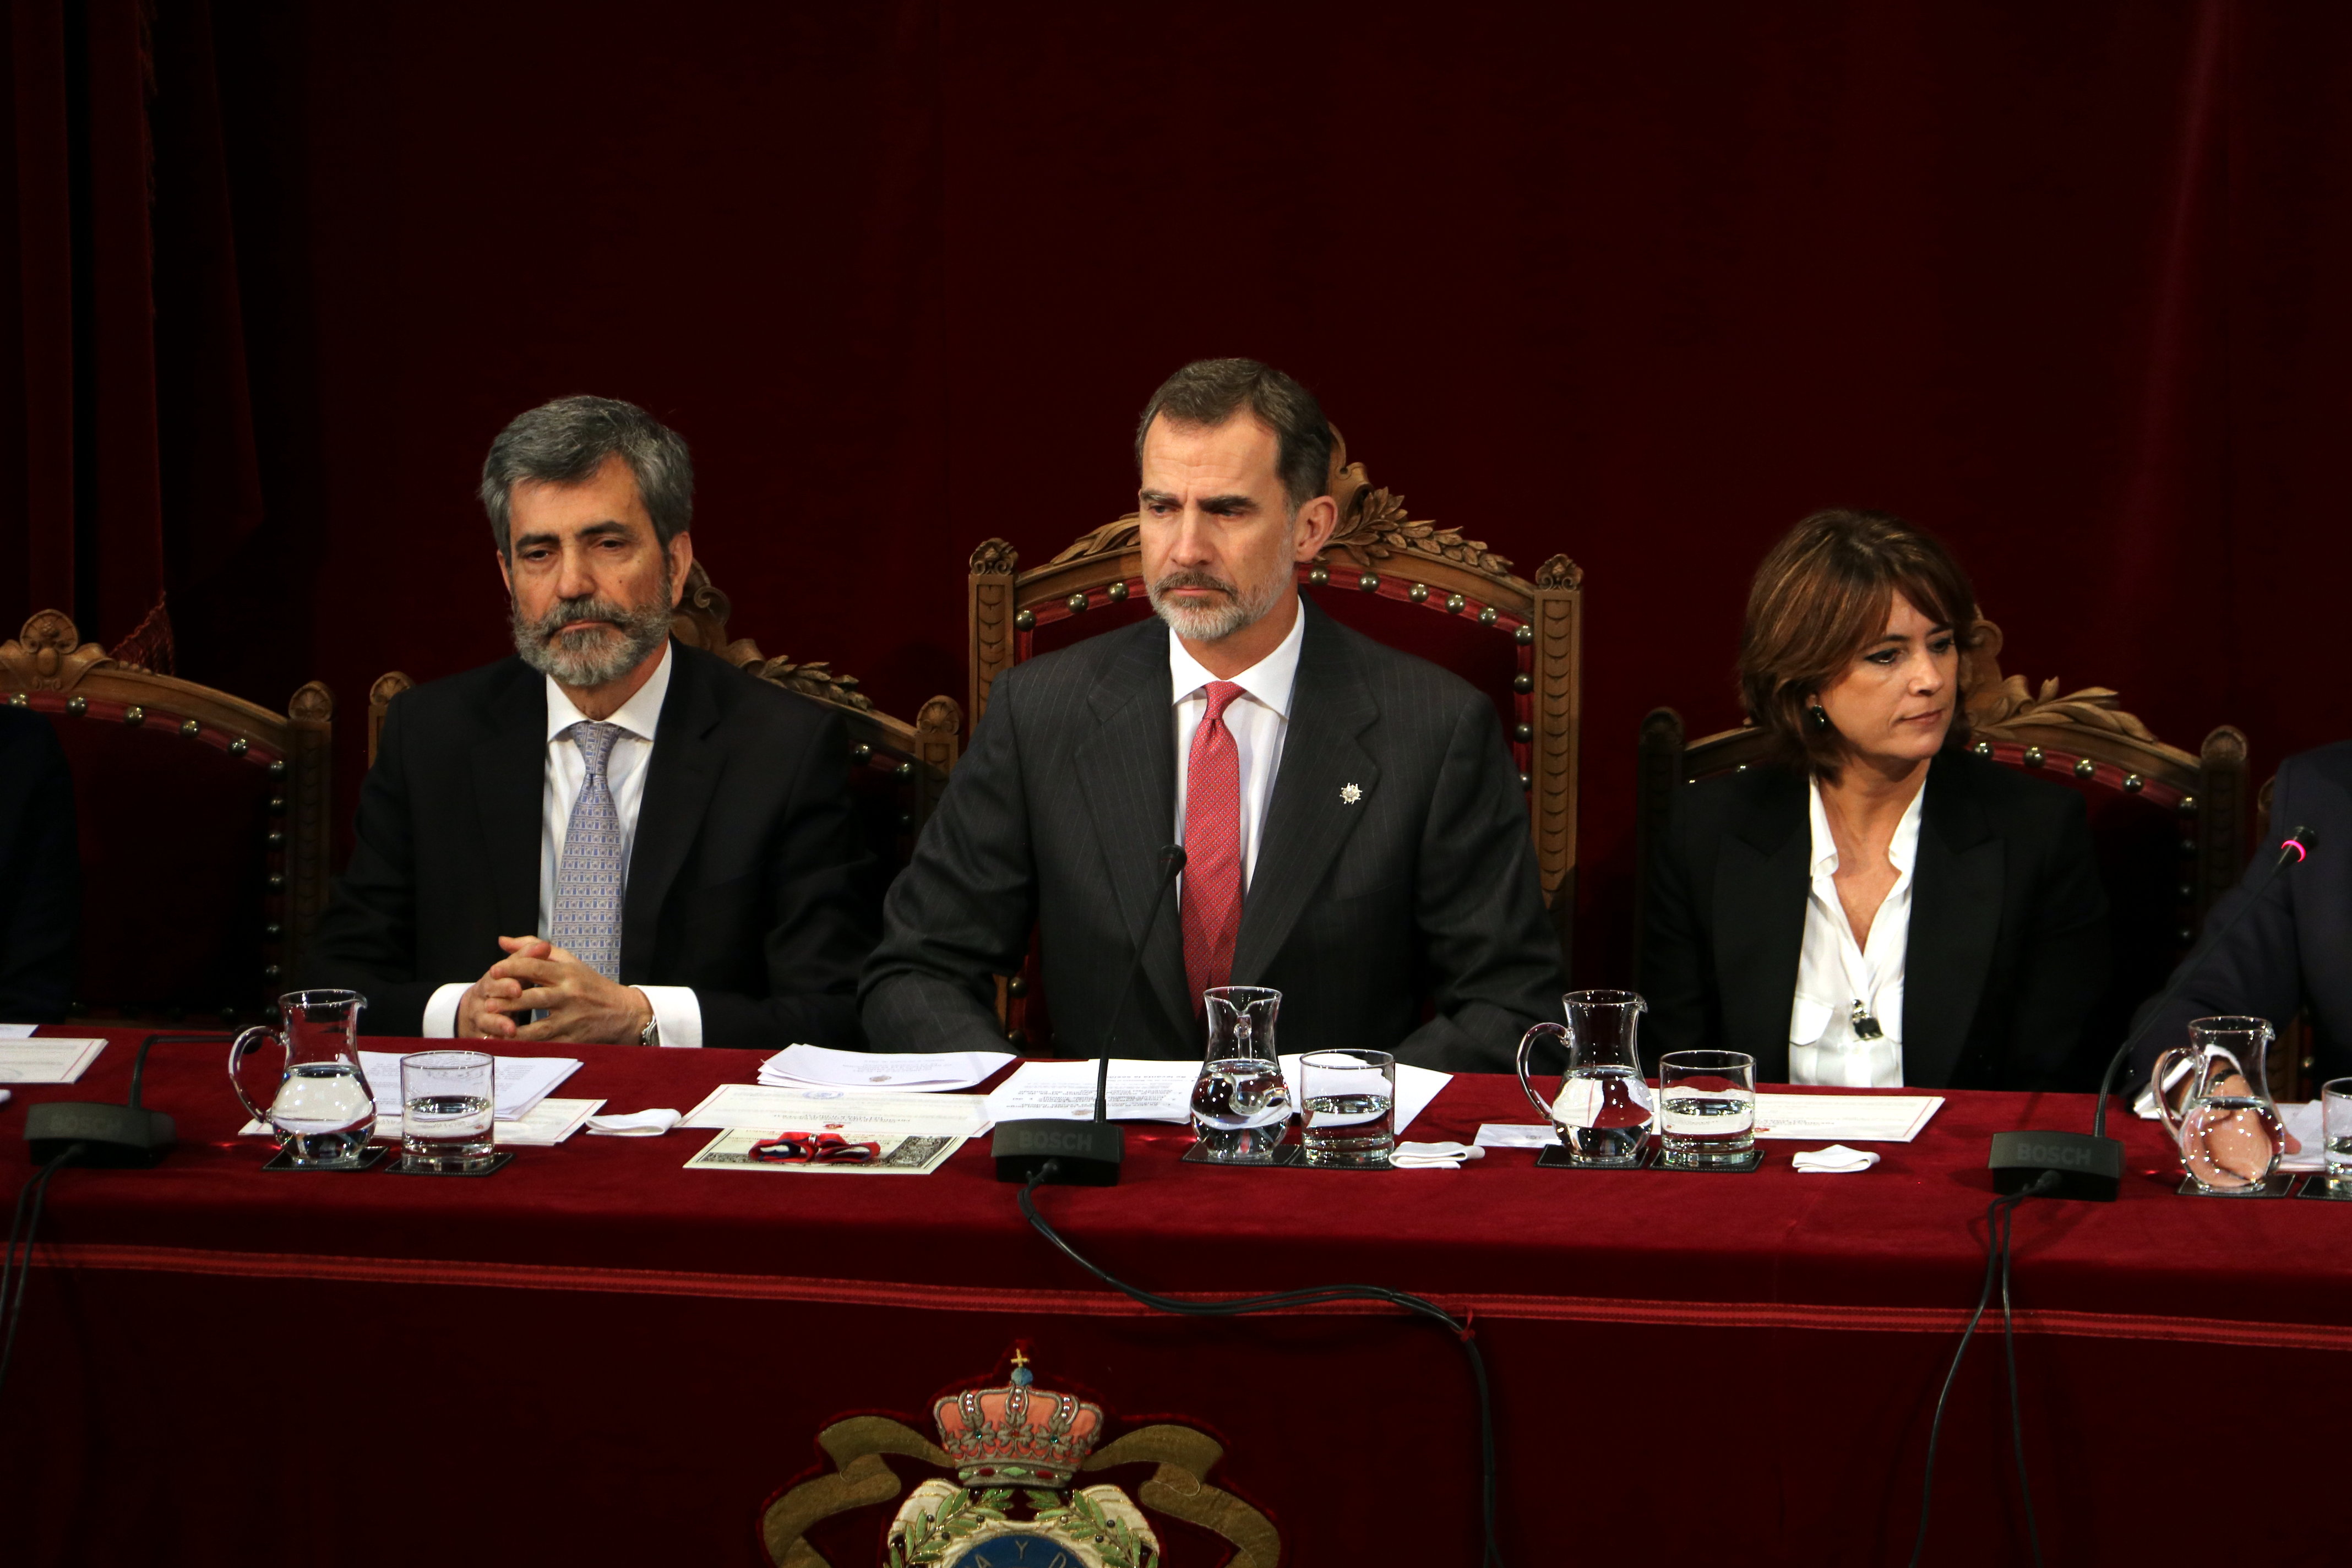 The King of Spain, Felipe (in the middle), in a judiciary event on January 8, 2019 (by Tània Tàpia)